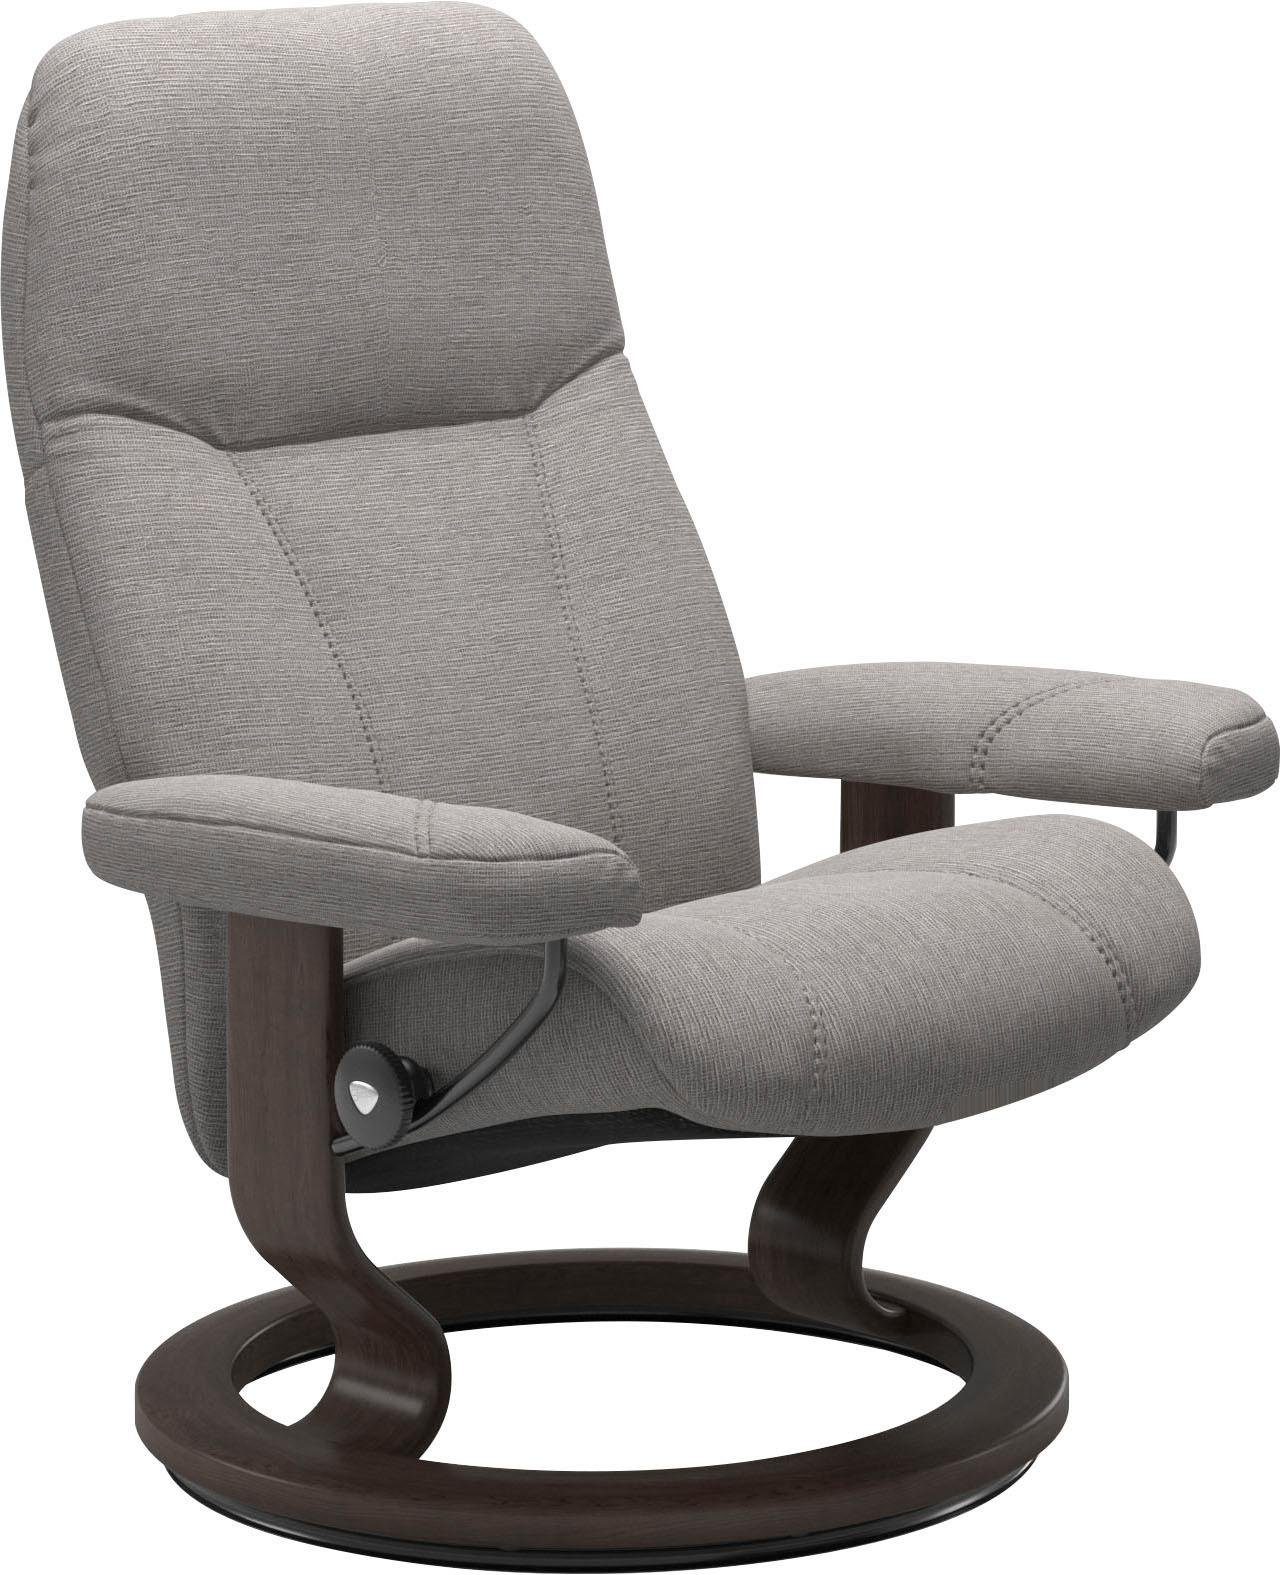 Consul, Größe Relaxsessel Base, Stressless® S, Gestell Classic Wenge mit